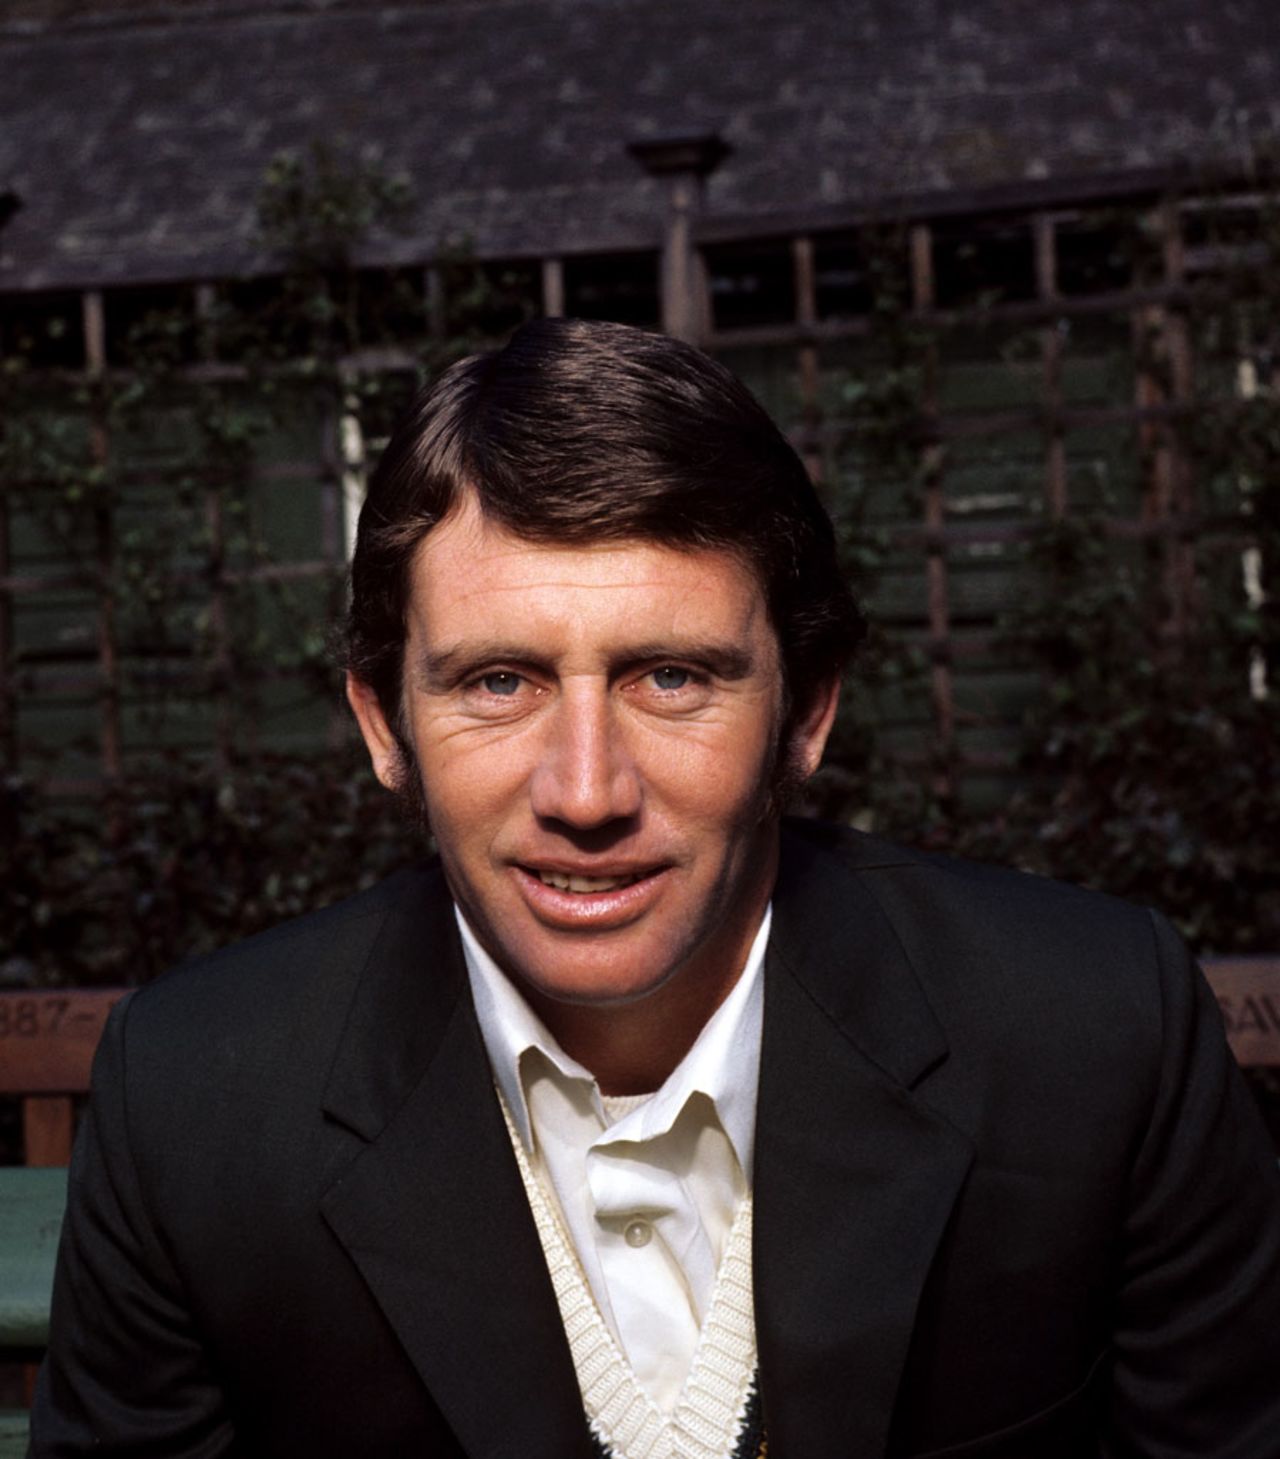 Ian Chappell, the Australian captain, on the Ashes tour, April 21, 1972